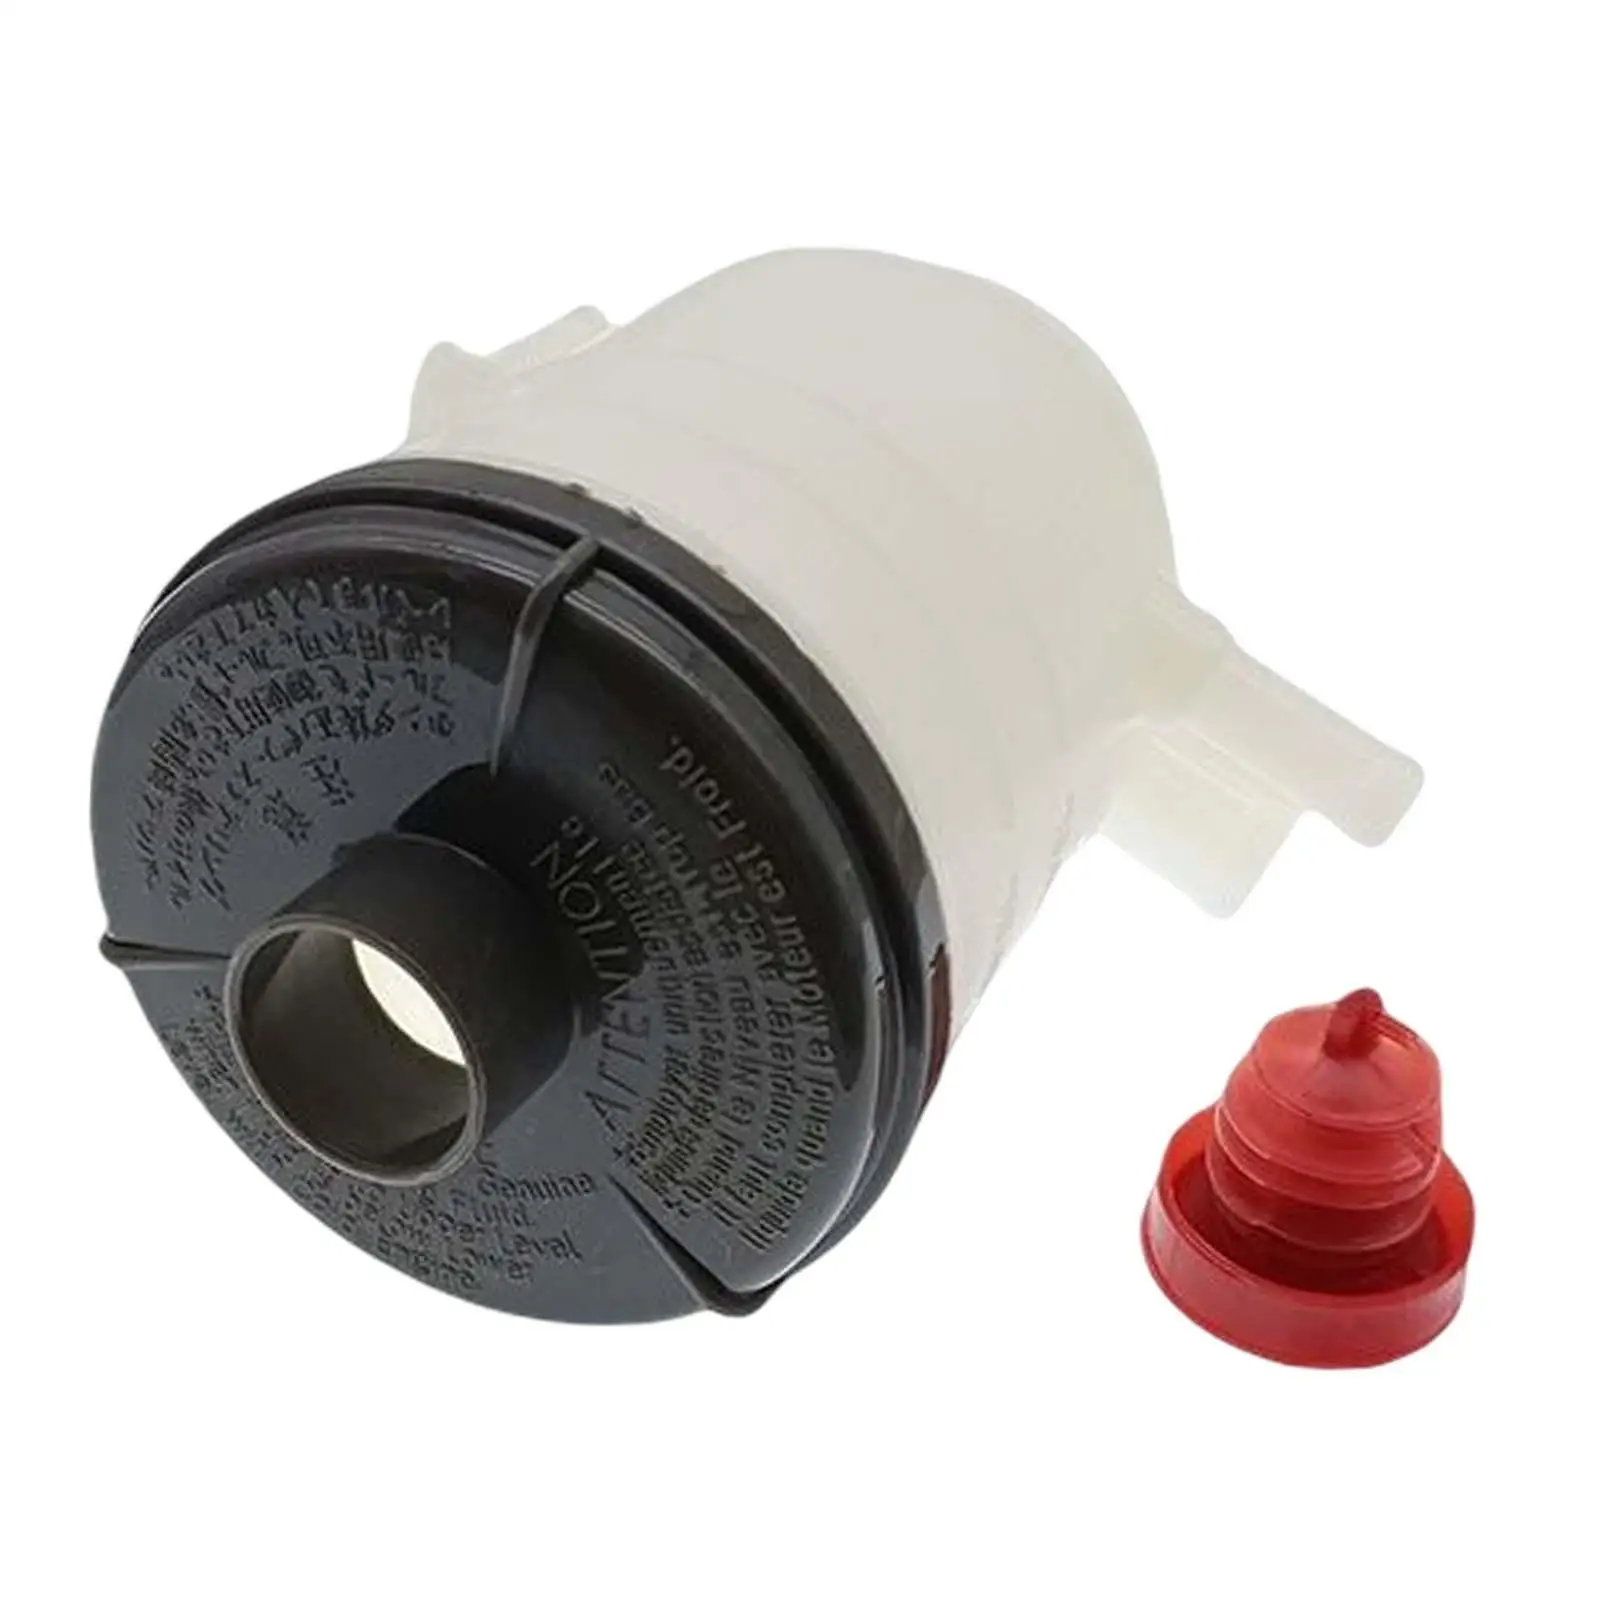 

Booster Pump Oil Cup Easy to Install Premium Replaces Spare Parts Power Steering Pump Reservoir for Honda Accord 98-02